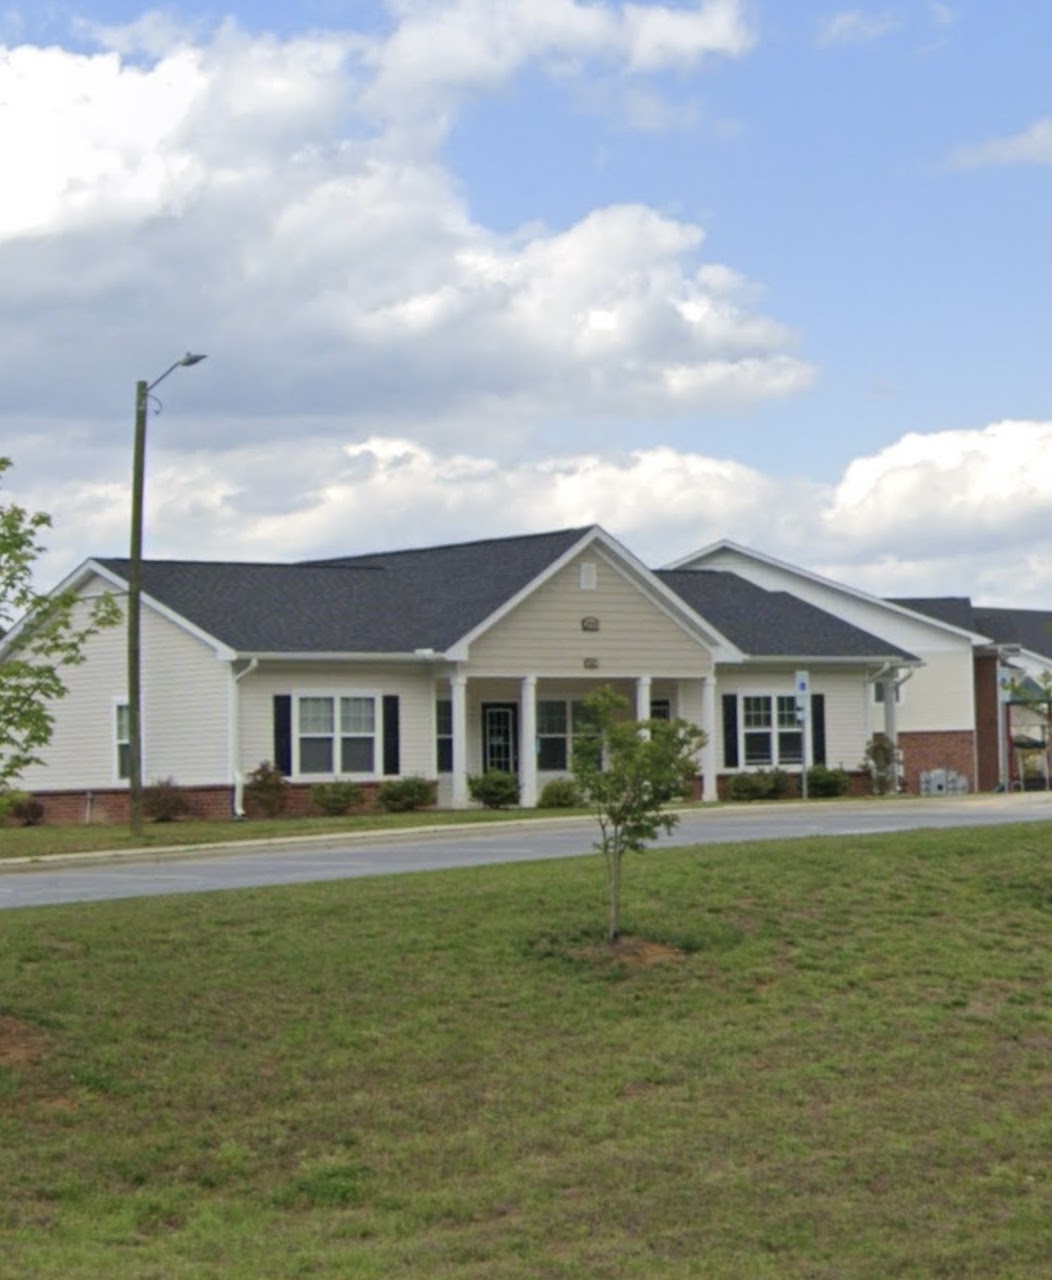 Photo of PHILLIP'S RIDGE. Affordable housing located at 200 MCDOWELL HIGH DRIVE MARION, NC 28752